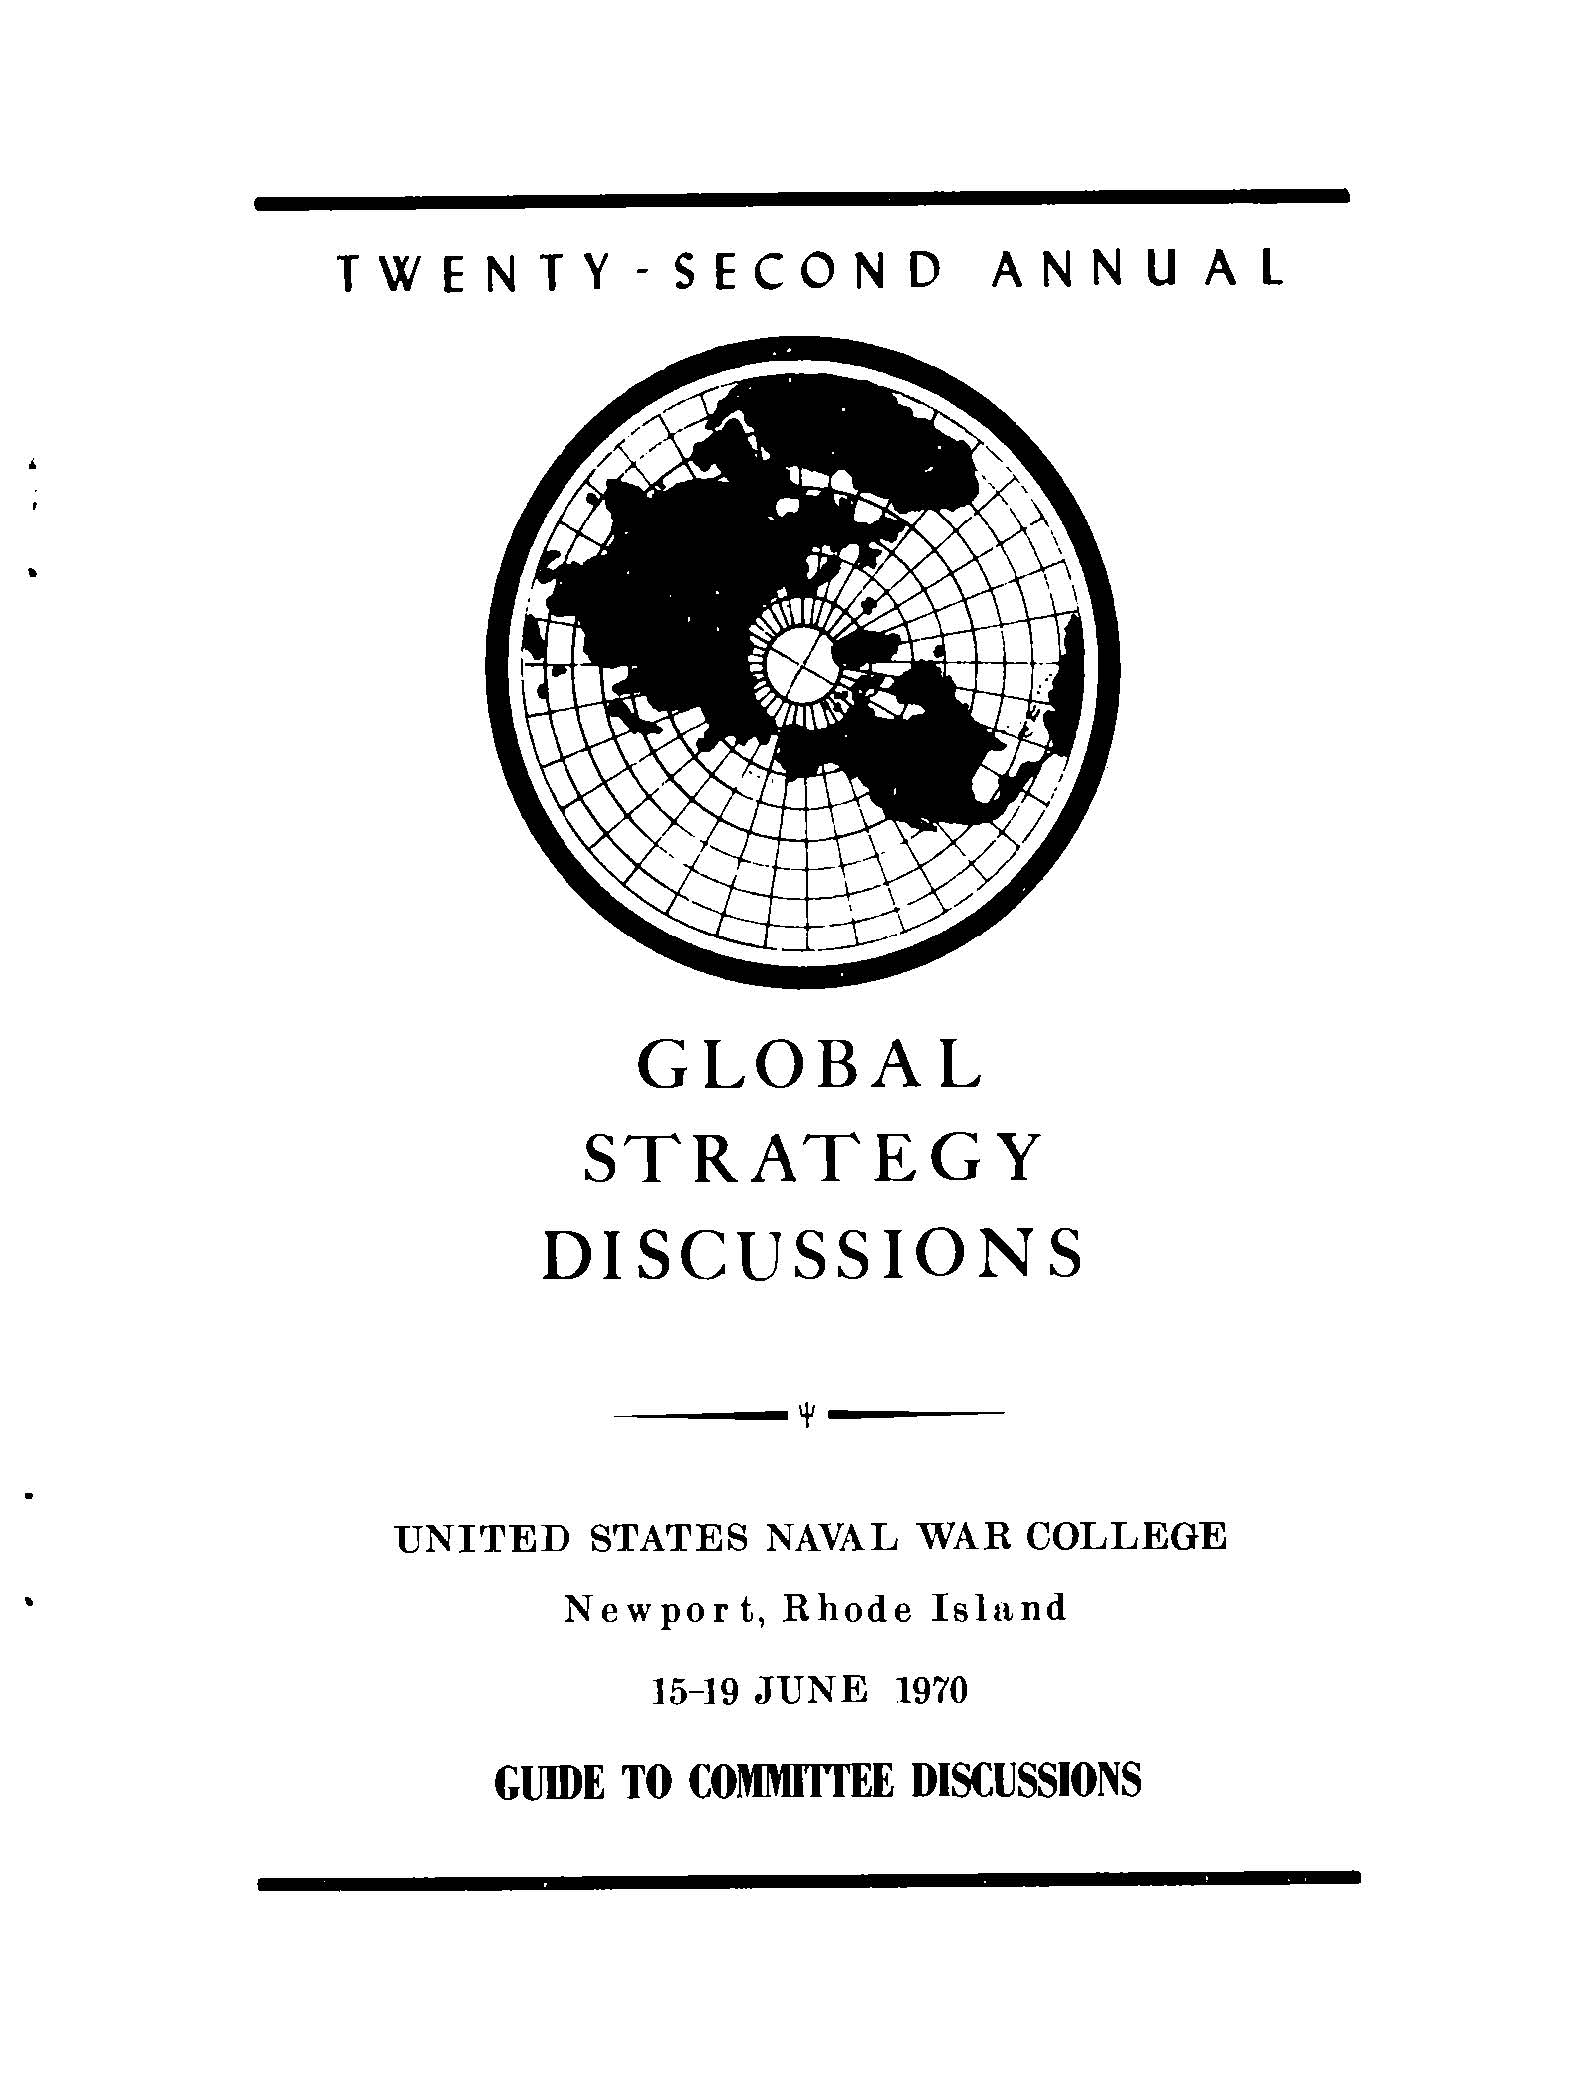 Global Strategy Discussions: Discussion topics and materials